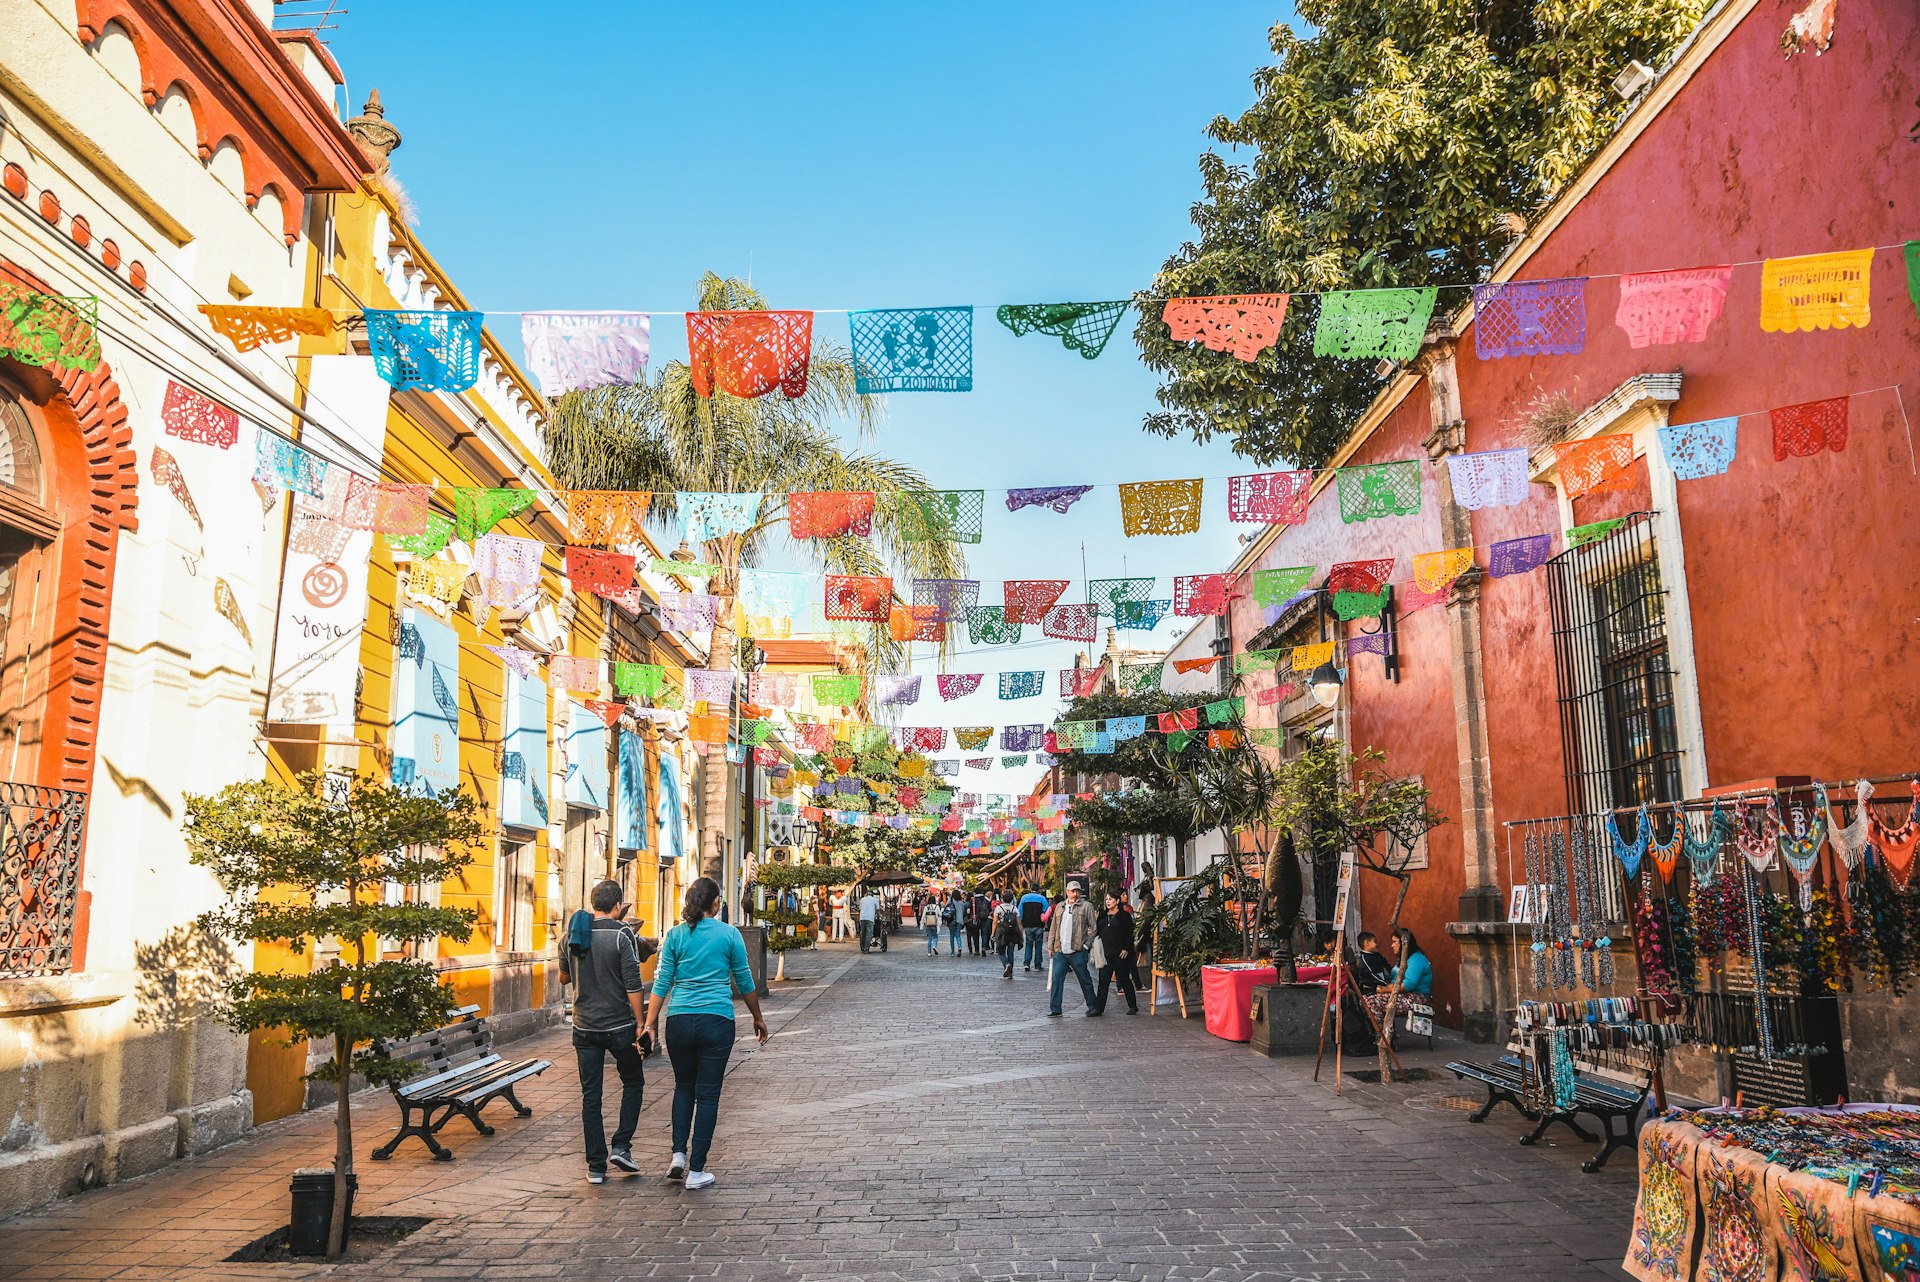 People walk down a stall-lined pedestrianized street with colorful bunting hanging overhead 